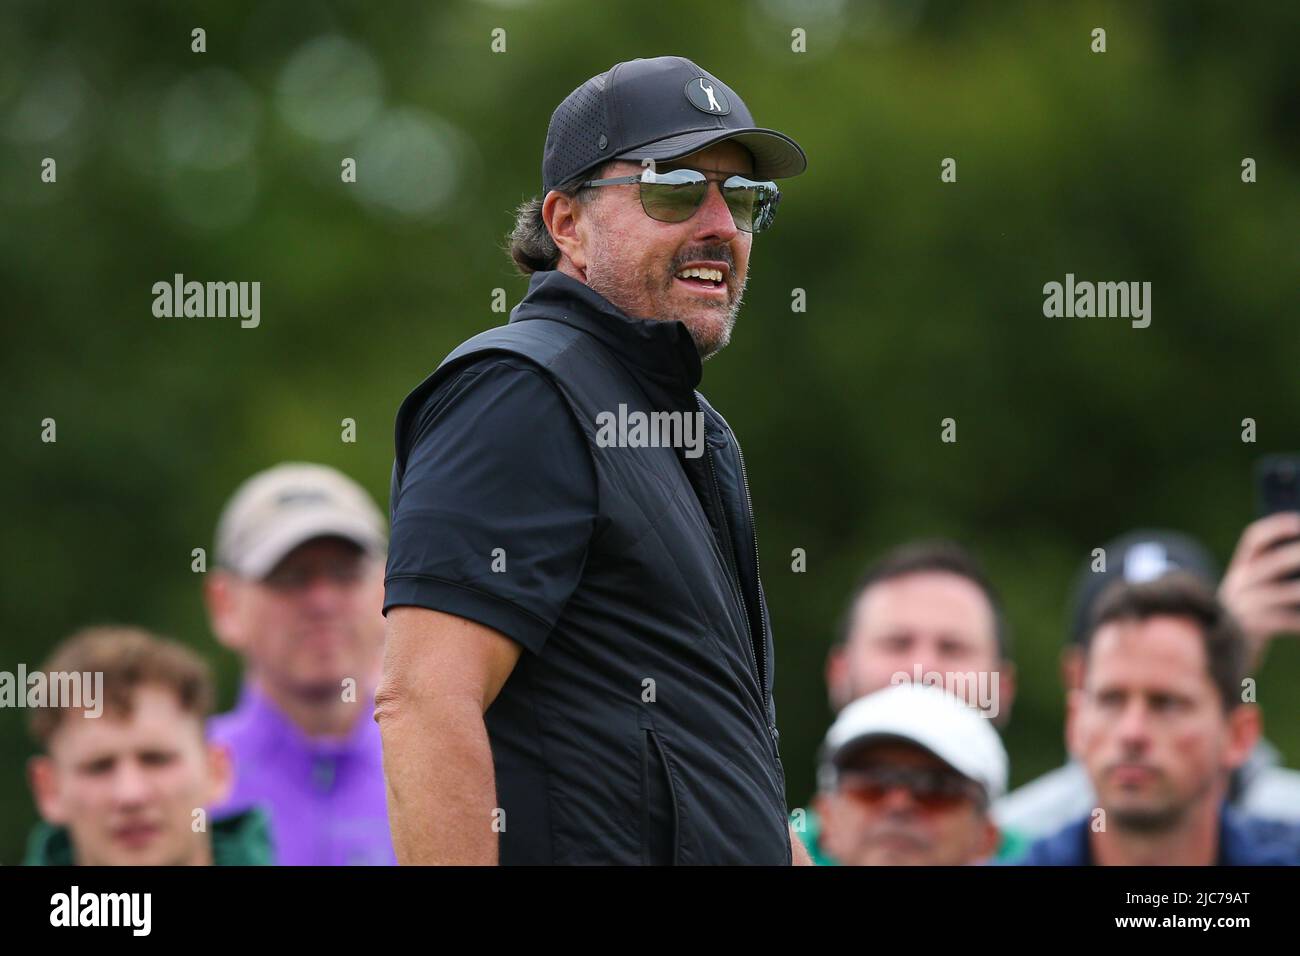 ST ALBANS, ENGLAND - JUNE 09: Phil Mickelson of the United States looks on during day one of the LIV Golf Invitational at The Centurion Club on June 9, 2022 in St Albans, England. (MB Media) Stock Photo